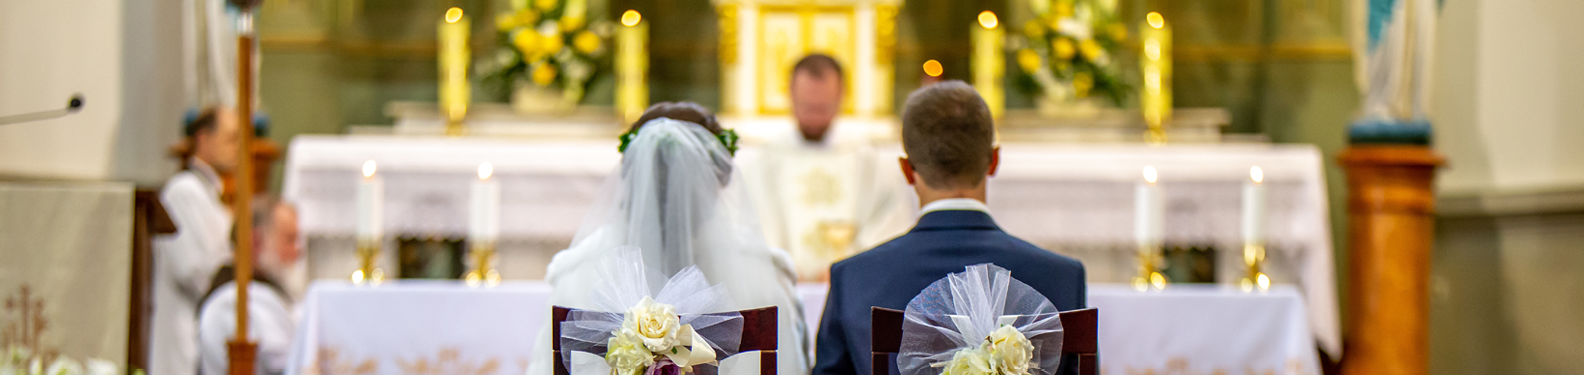 wedding ceremony, couple sitting on chairs in front of sanctuary, view from the back